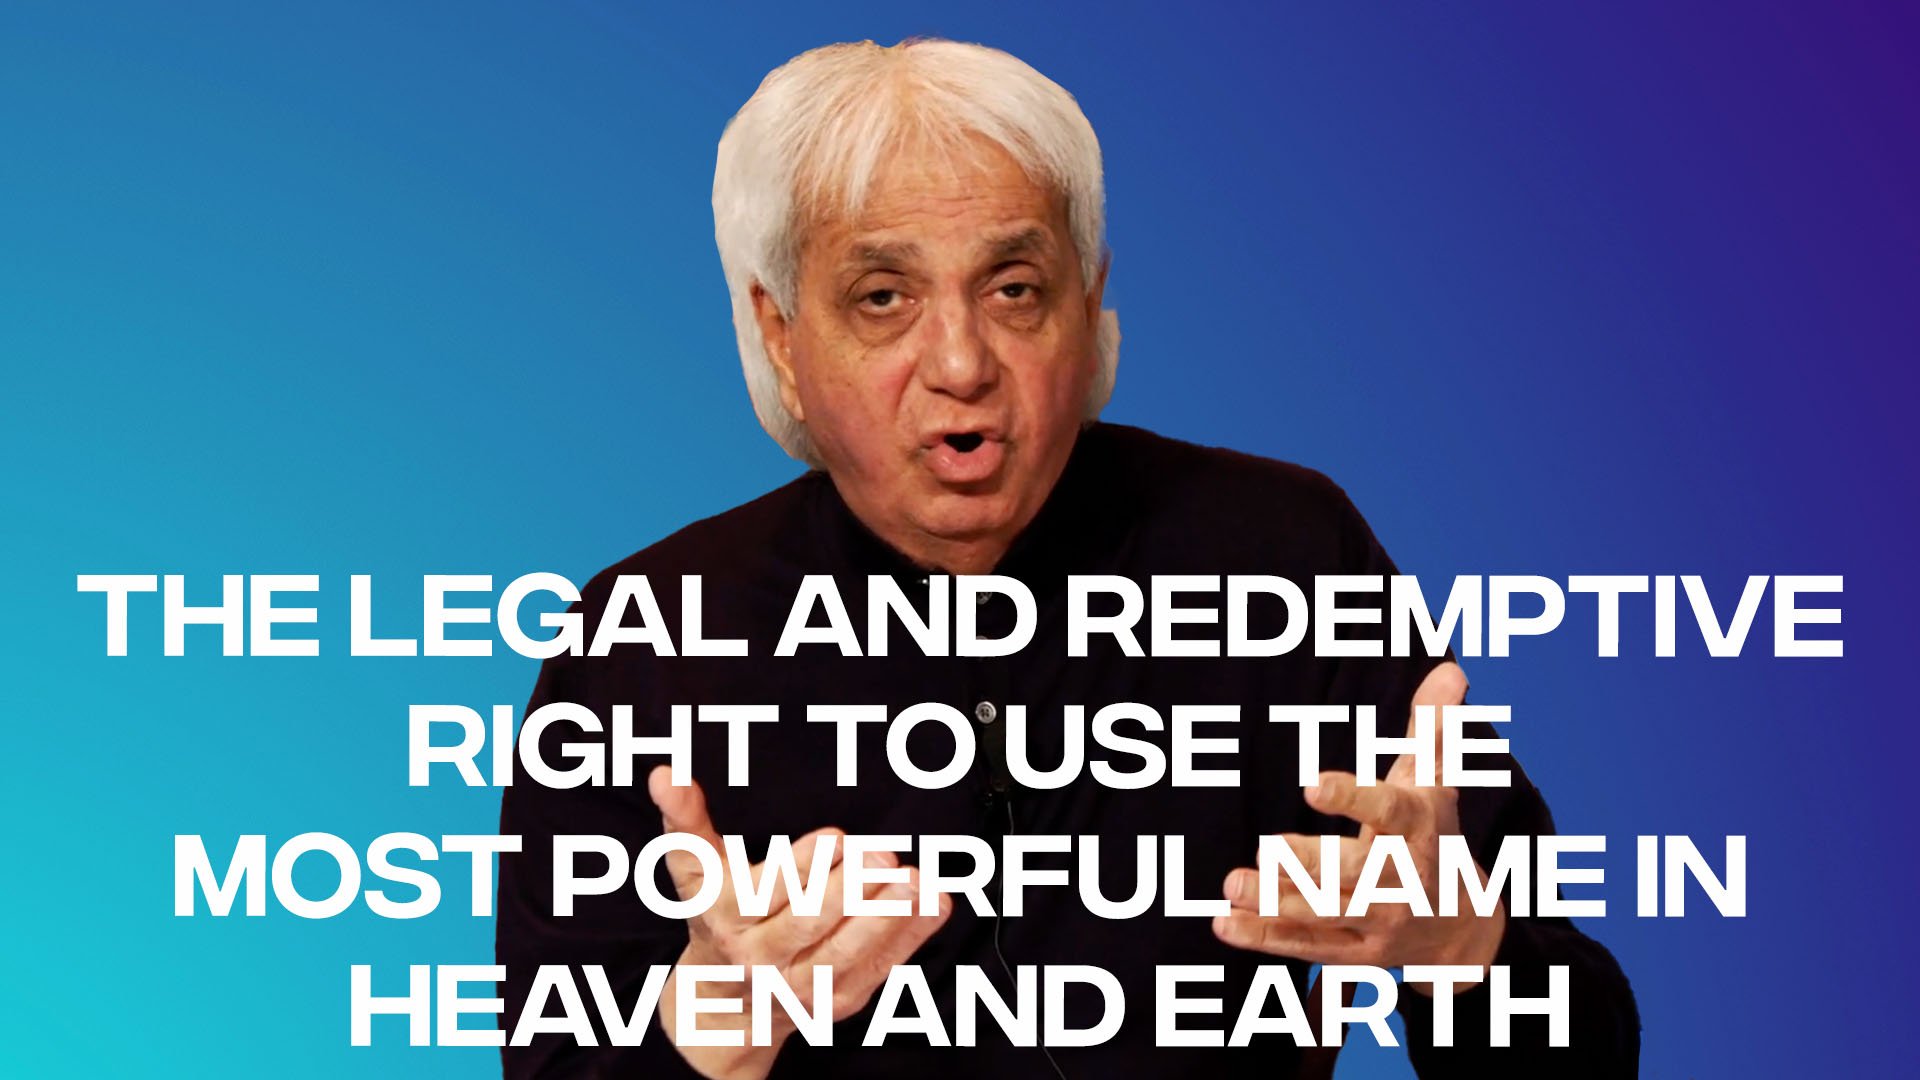 The Legal and Redemptive Right to Use The Most Powerful Name in Heaven and Earth